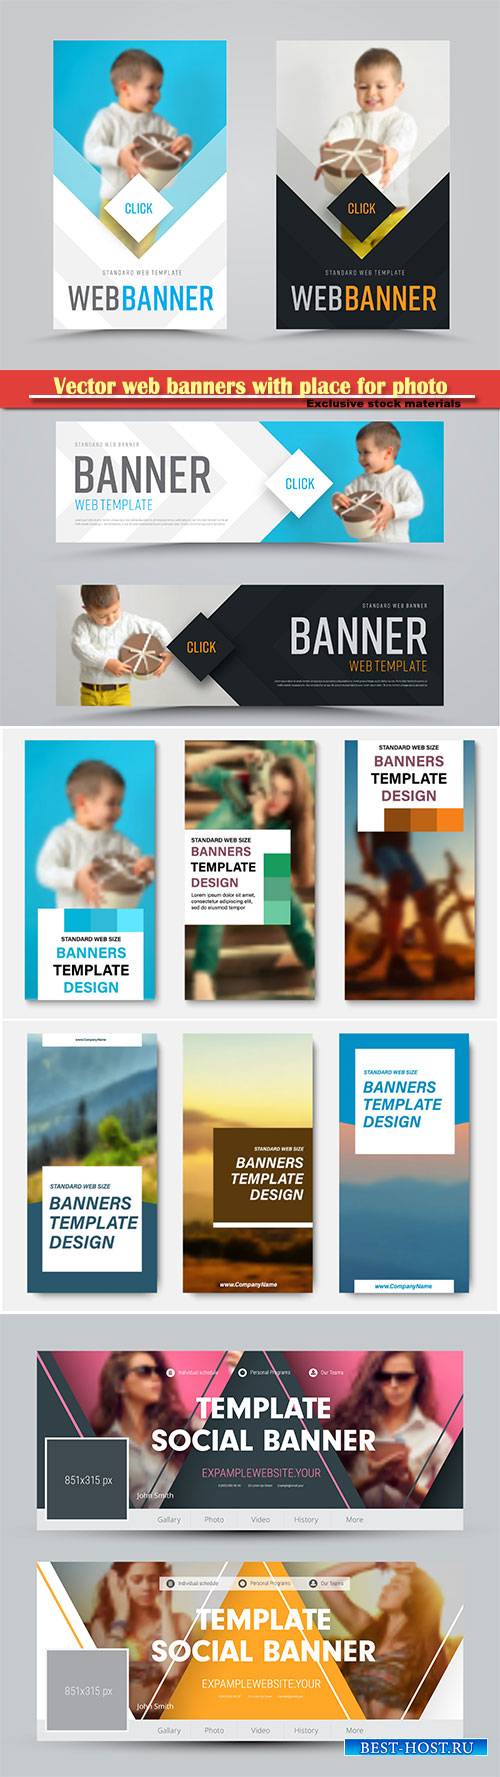 Vector web banners with place for photo and squares for the header